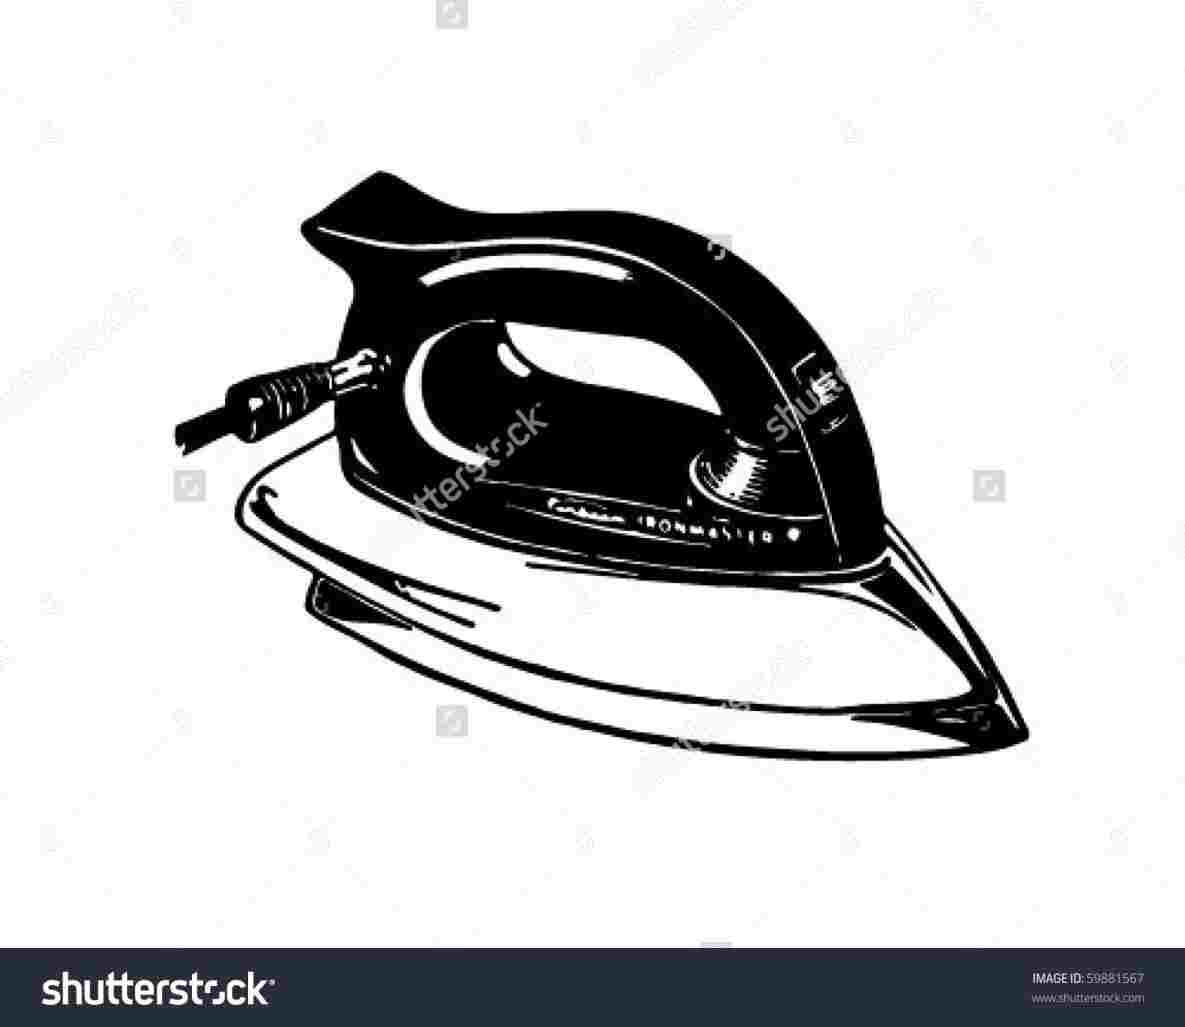 Flat iron clipart black and white 6 » Clipart Station.